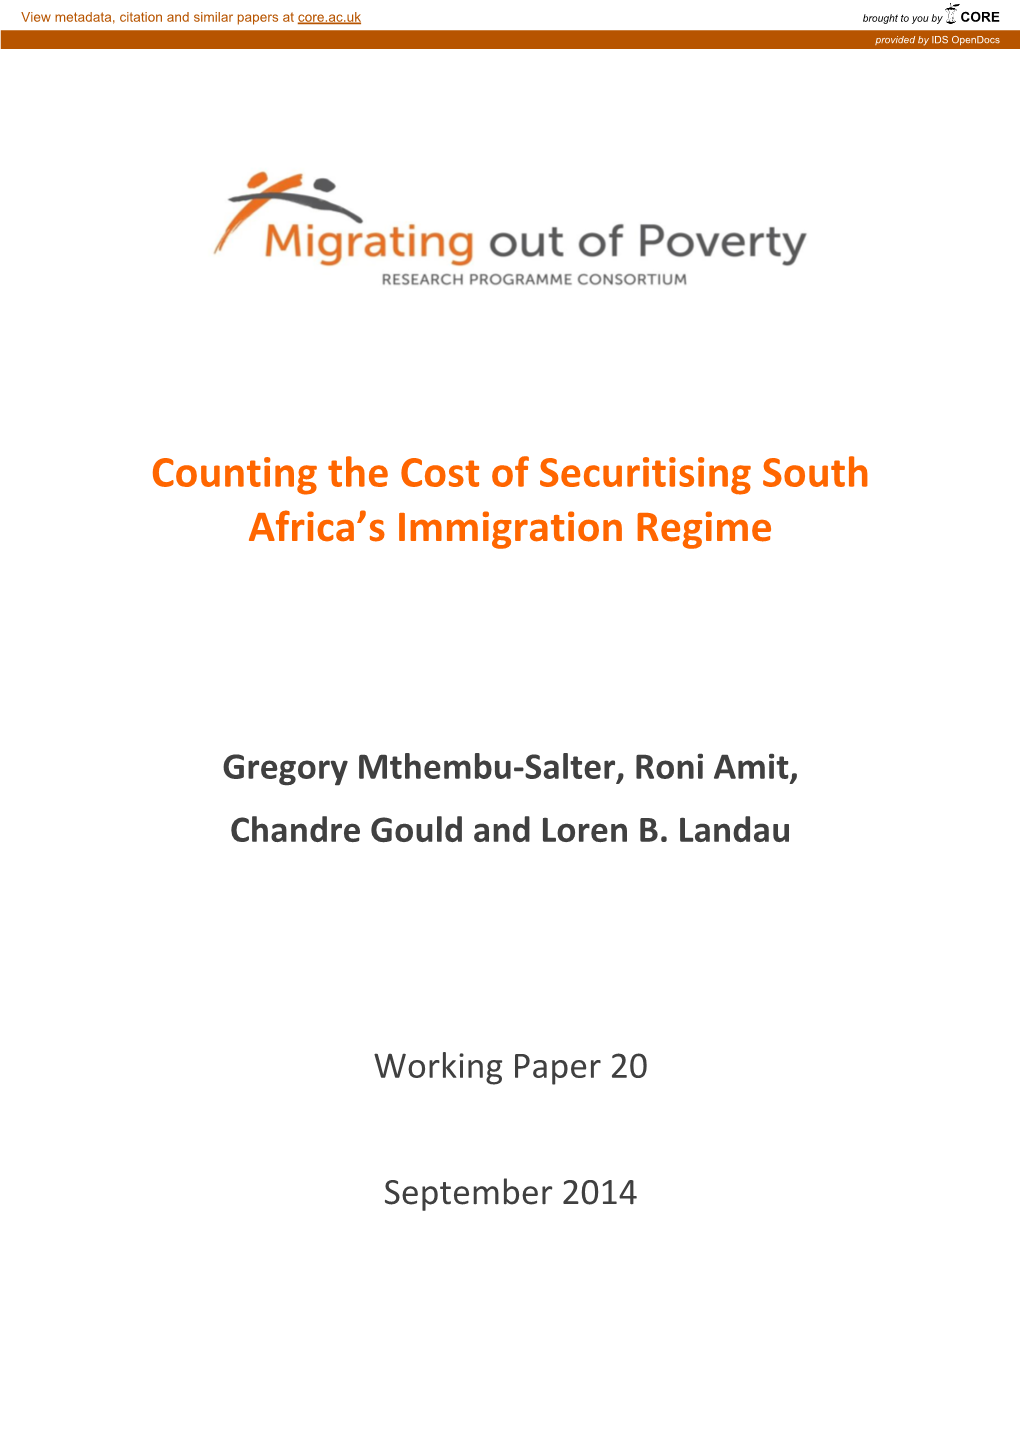 Counting the Cost of Securitising South Africa's Immigration